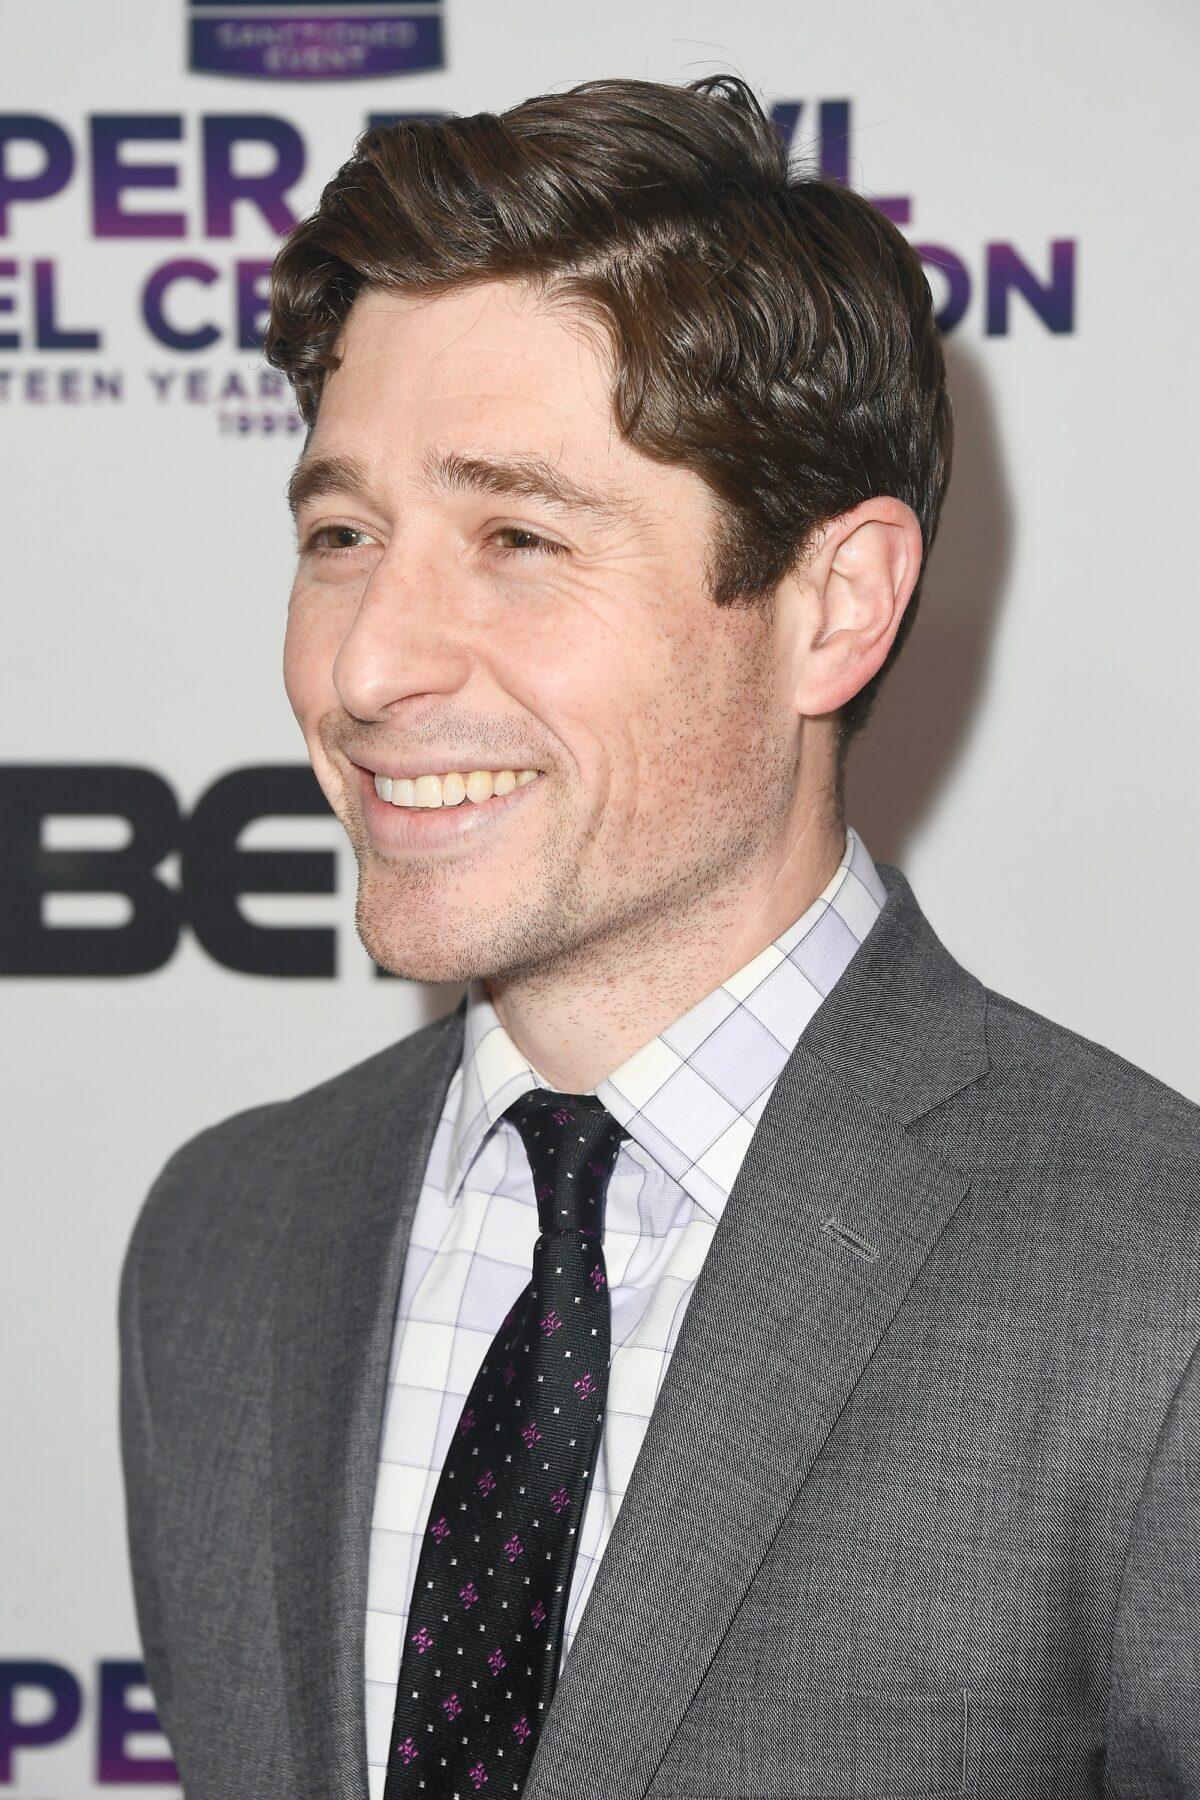 Minneapolis Mayor Jacob Frey at BET Presents 19th Annual Super Bowl Gospel Celebration at Bethel University in St. Paul, Minn., on Feb. 1, 2018. (Photo by Frazer Harrison/Getty Images for BET)